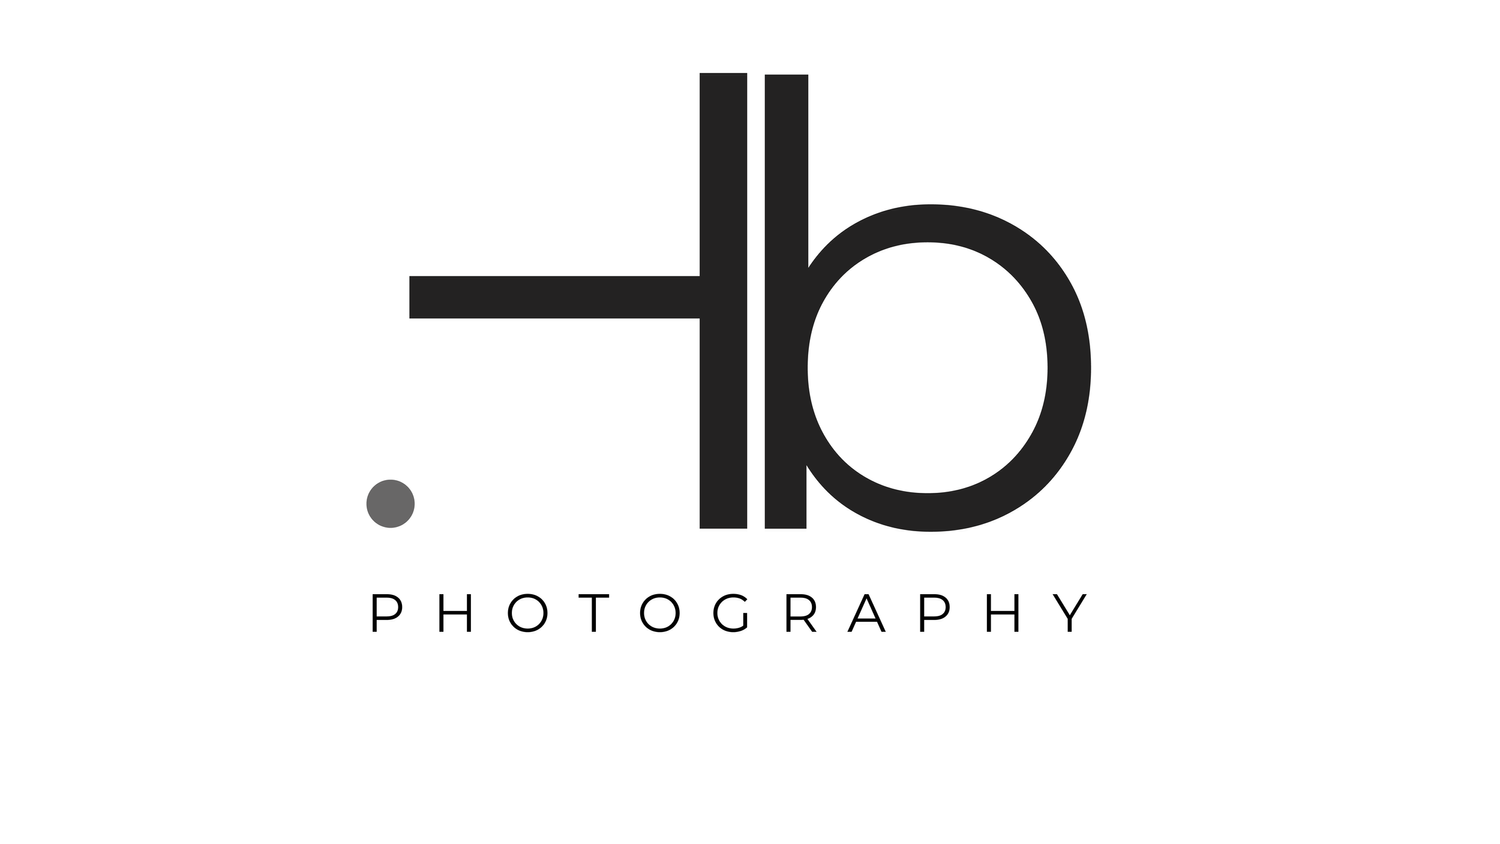 HB PHOTOGRAPHY